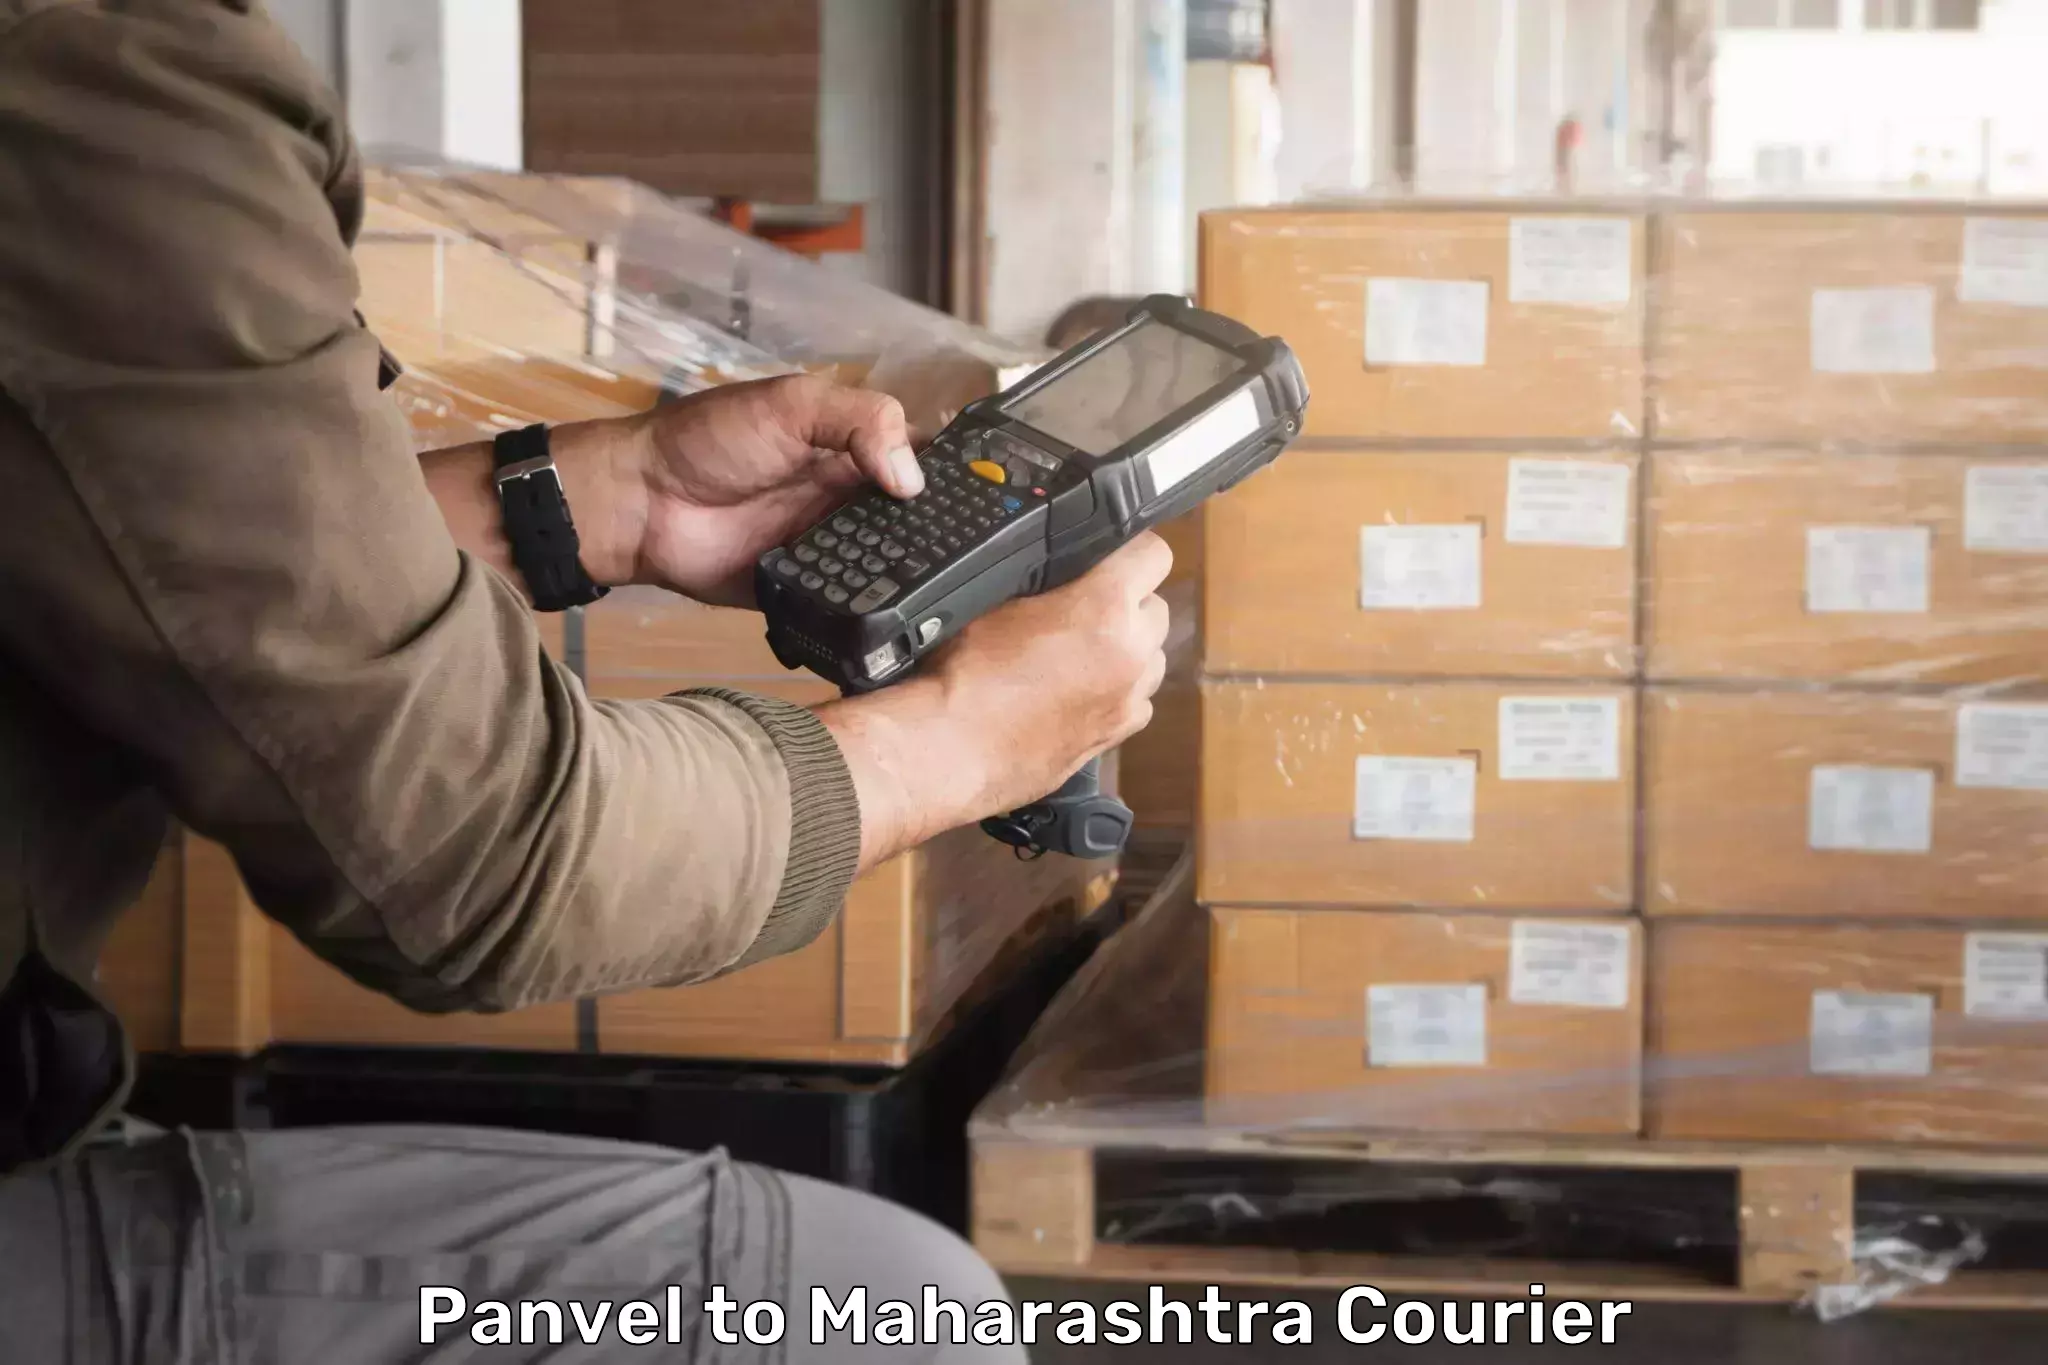 Multi-national courier services Panvel to Panvel